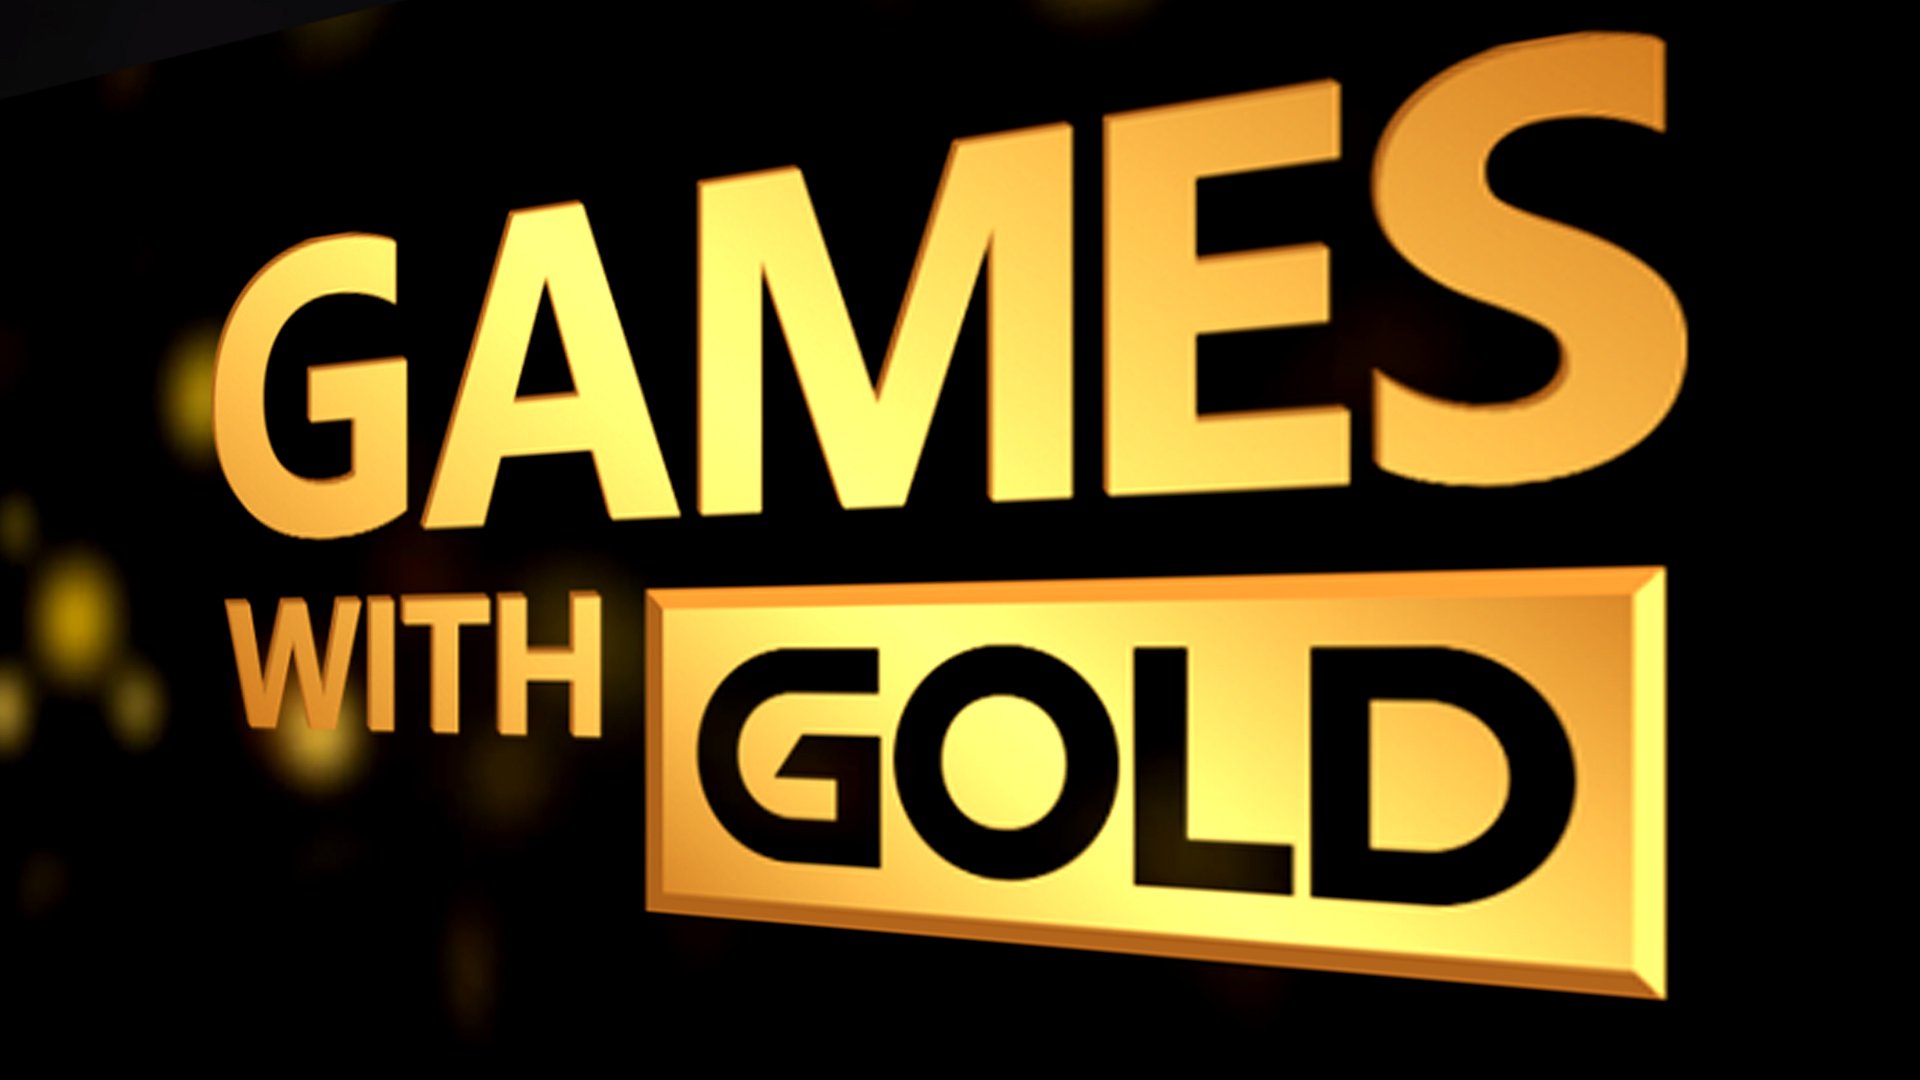 Xbox Games with Gold will soon no longer include Xbox 360 titles